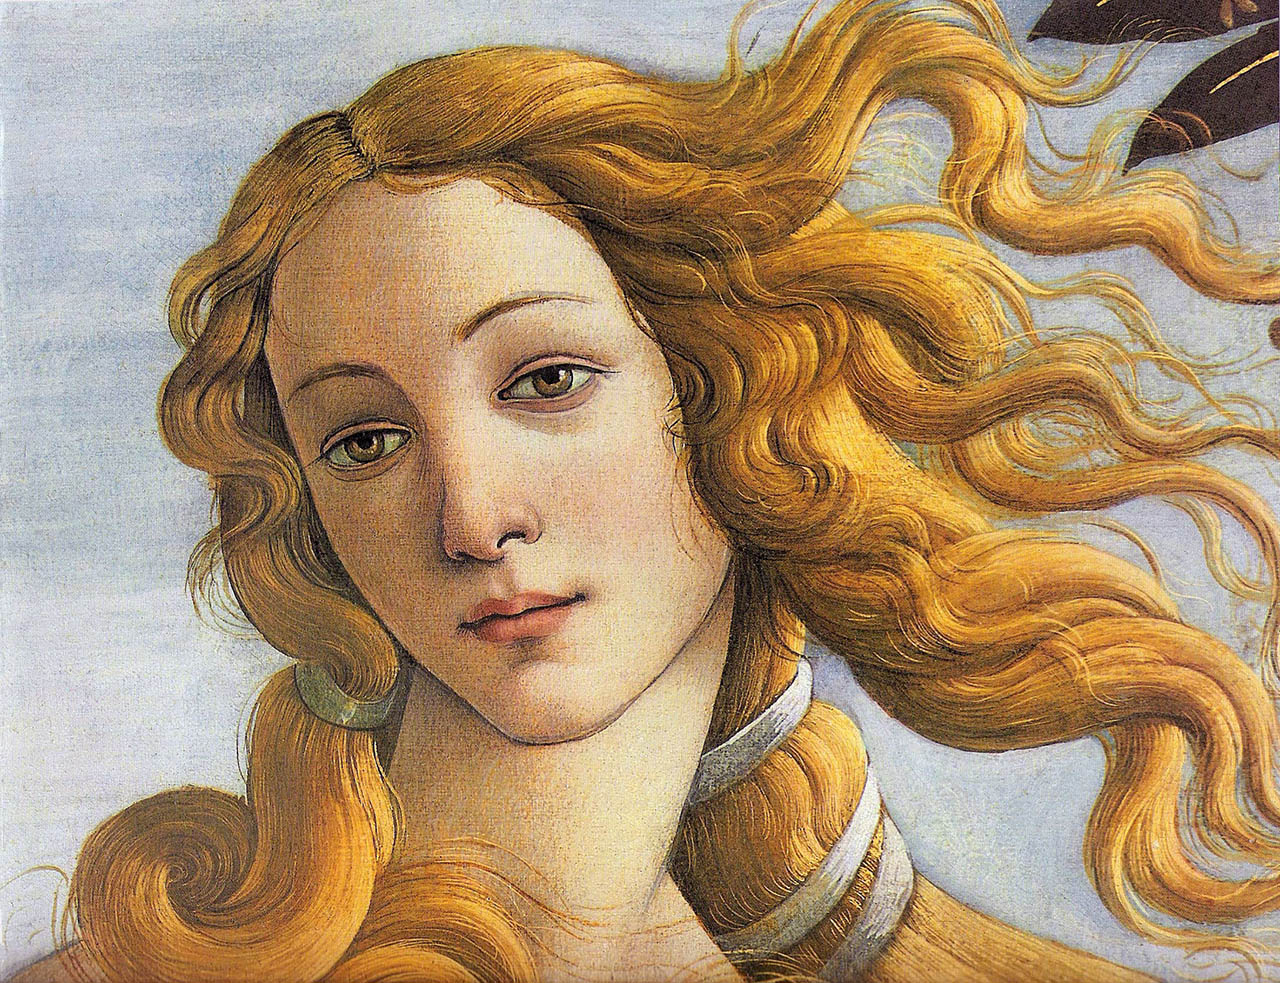 Some Masterpieces From The Public Domain Botticelli Daystar